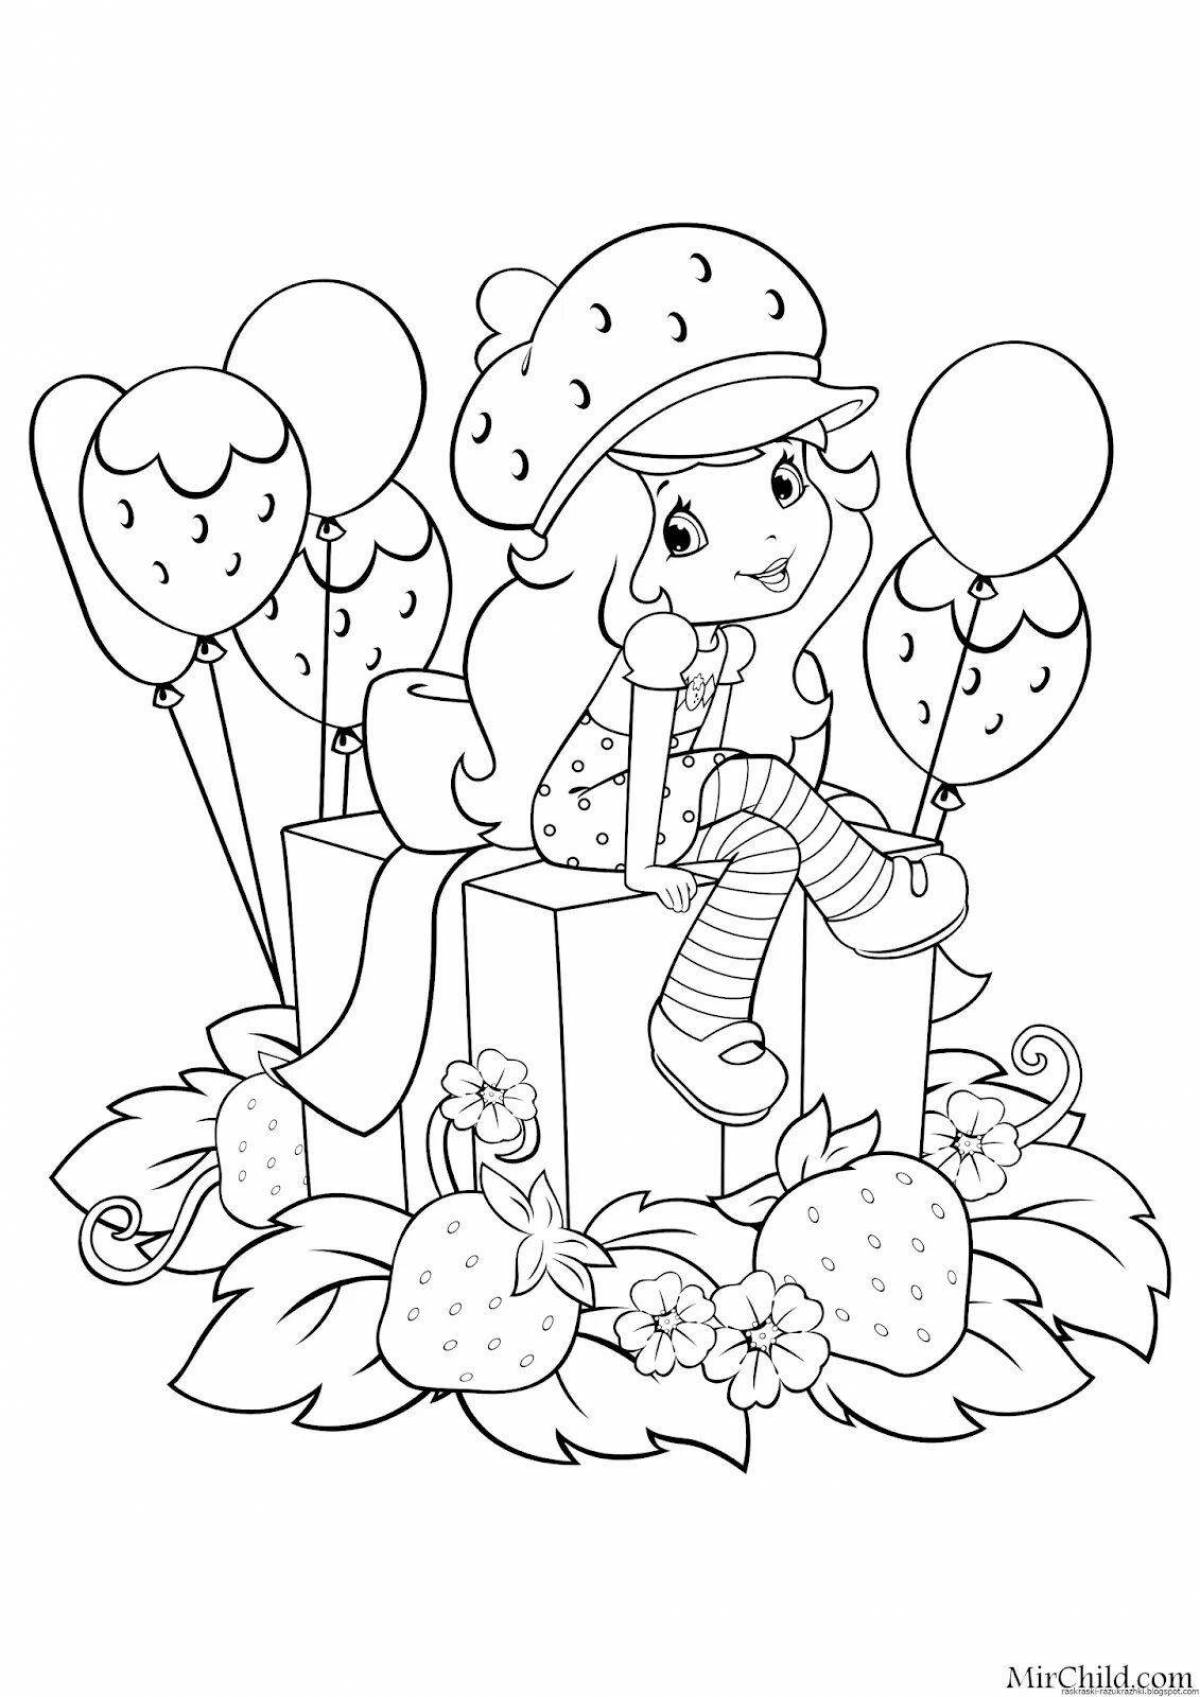 Incentive coloring card for kids